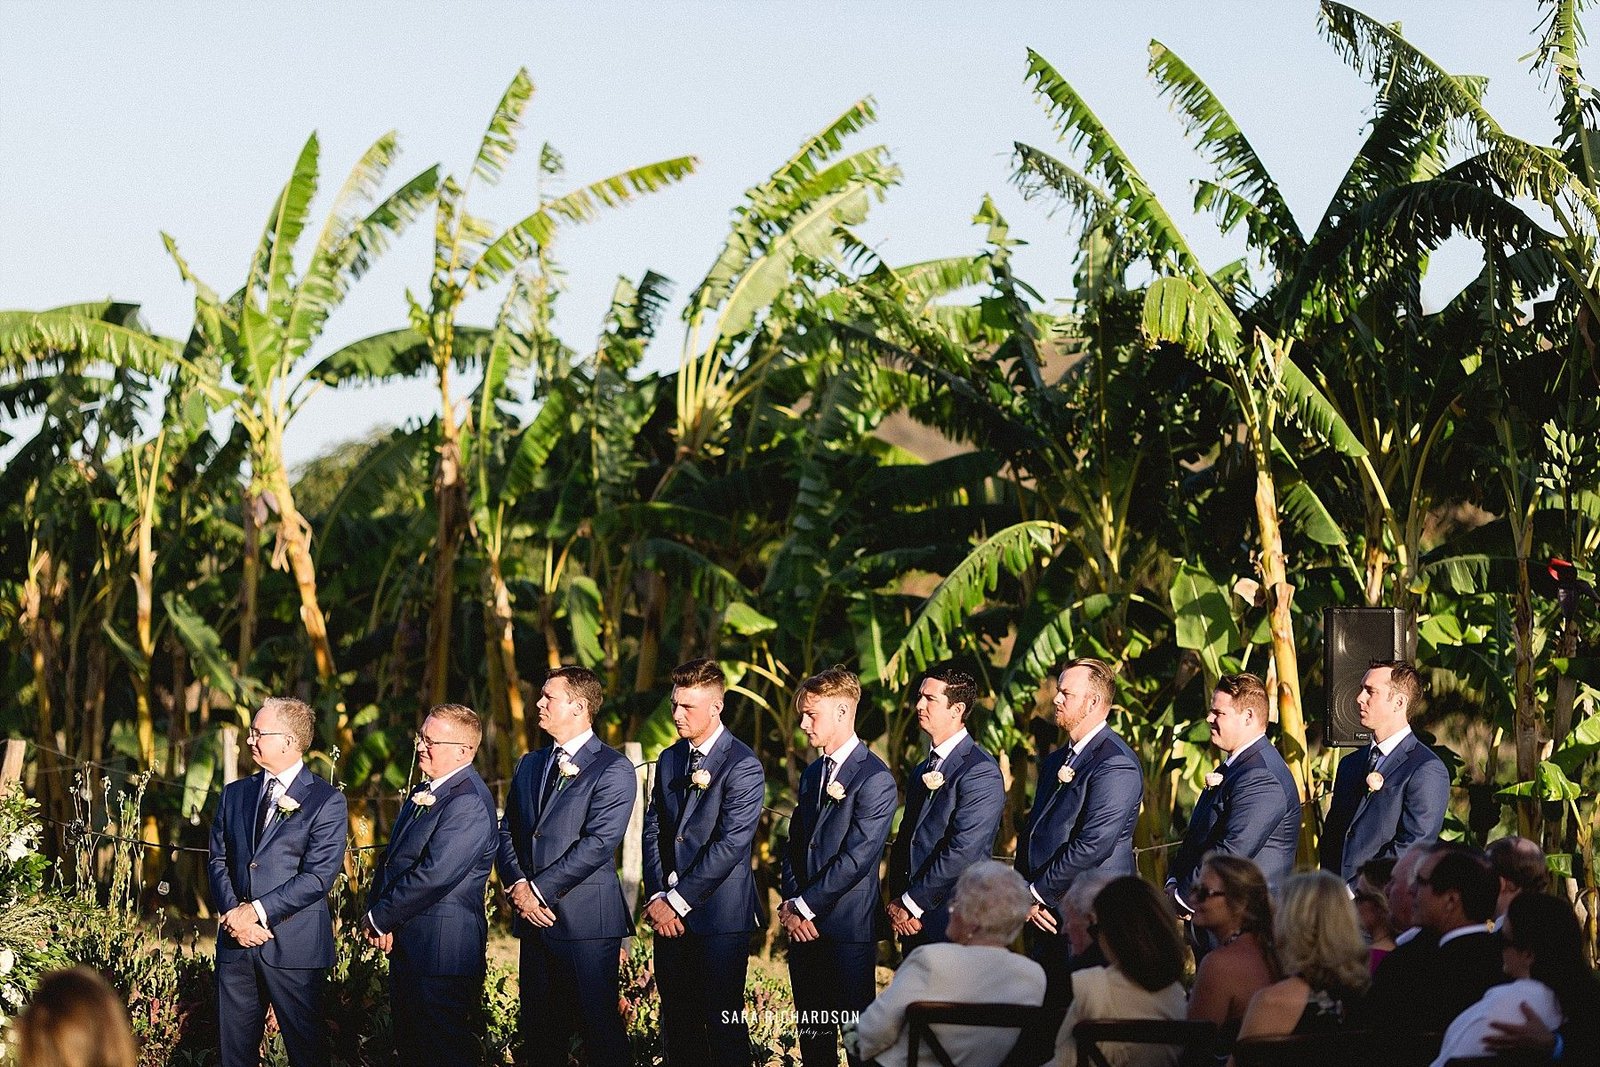 Groomsmen on the other side, getting the Groom's back as he says his personal vows to his future wife. Such an emotional moment!